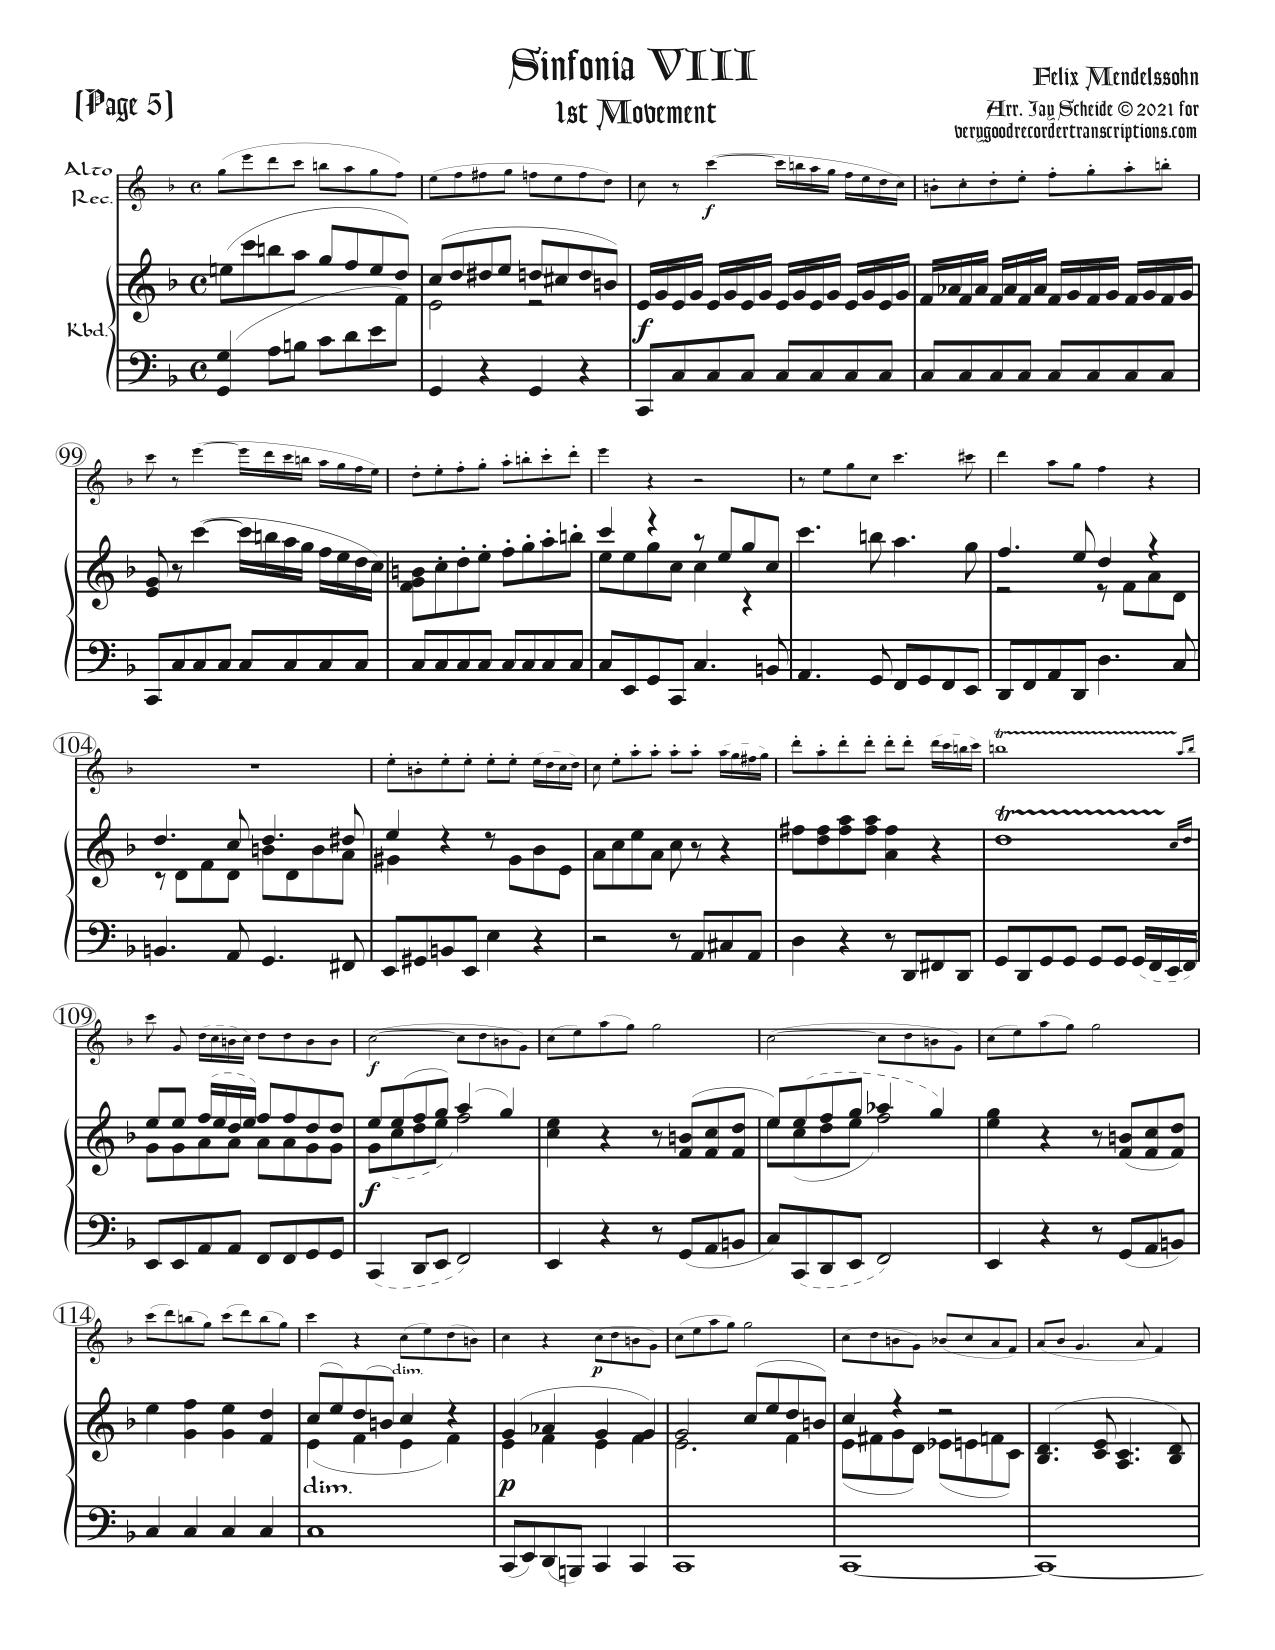 1st movement from String Symphony No. 8